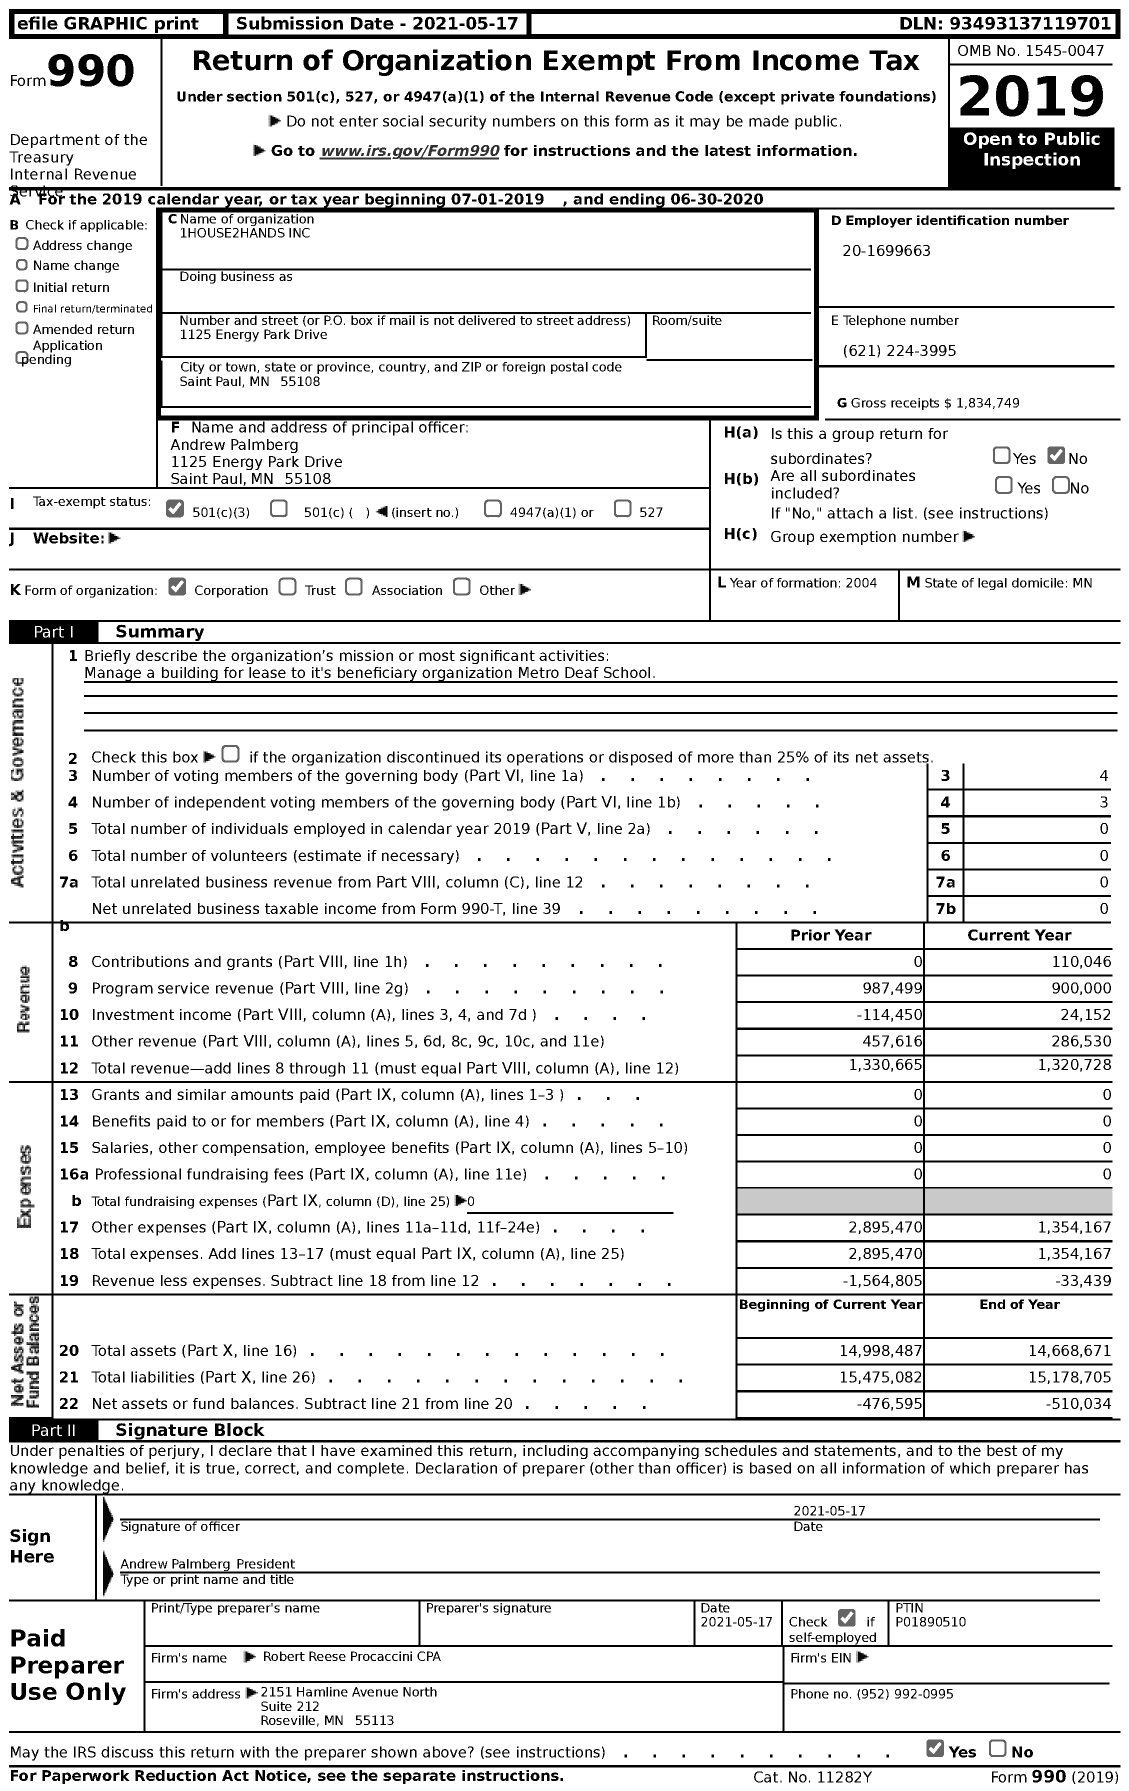 Image of first page of 2019 Form 990 for 1house2hands